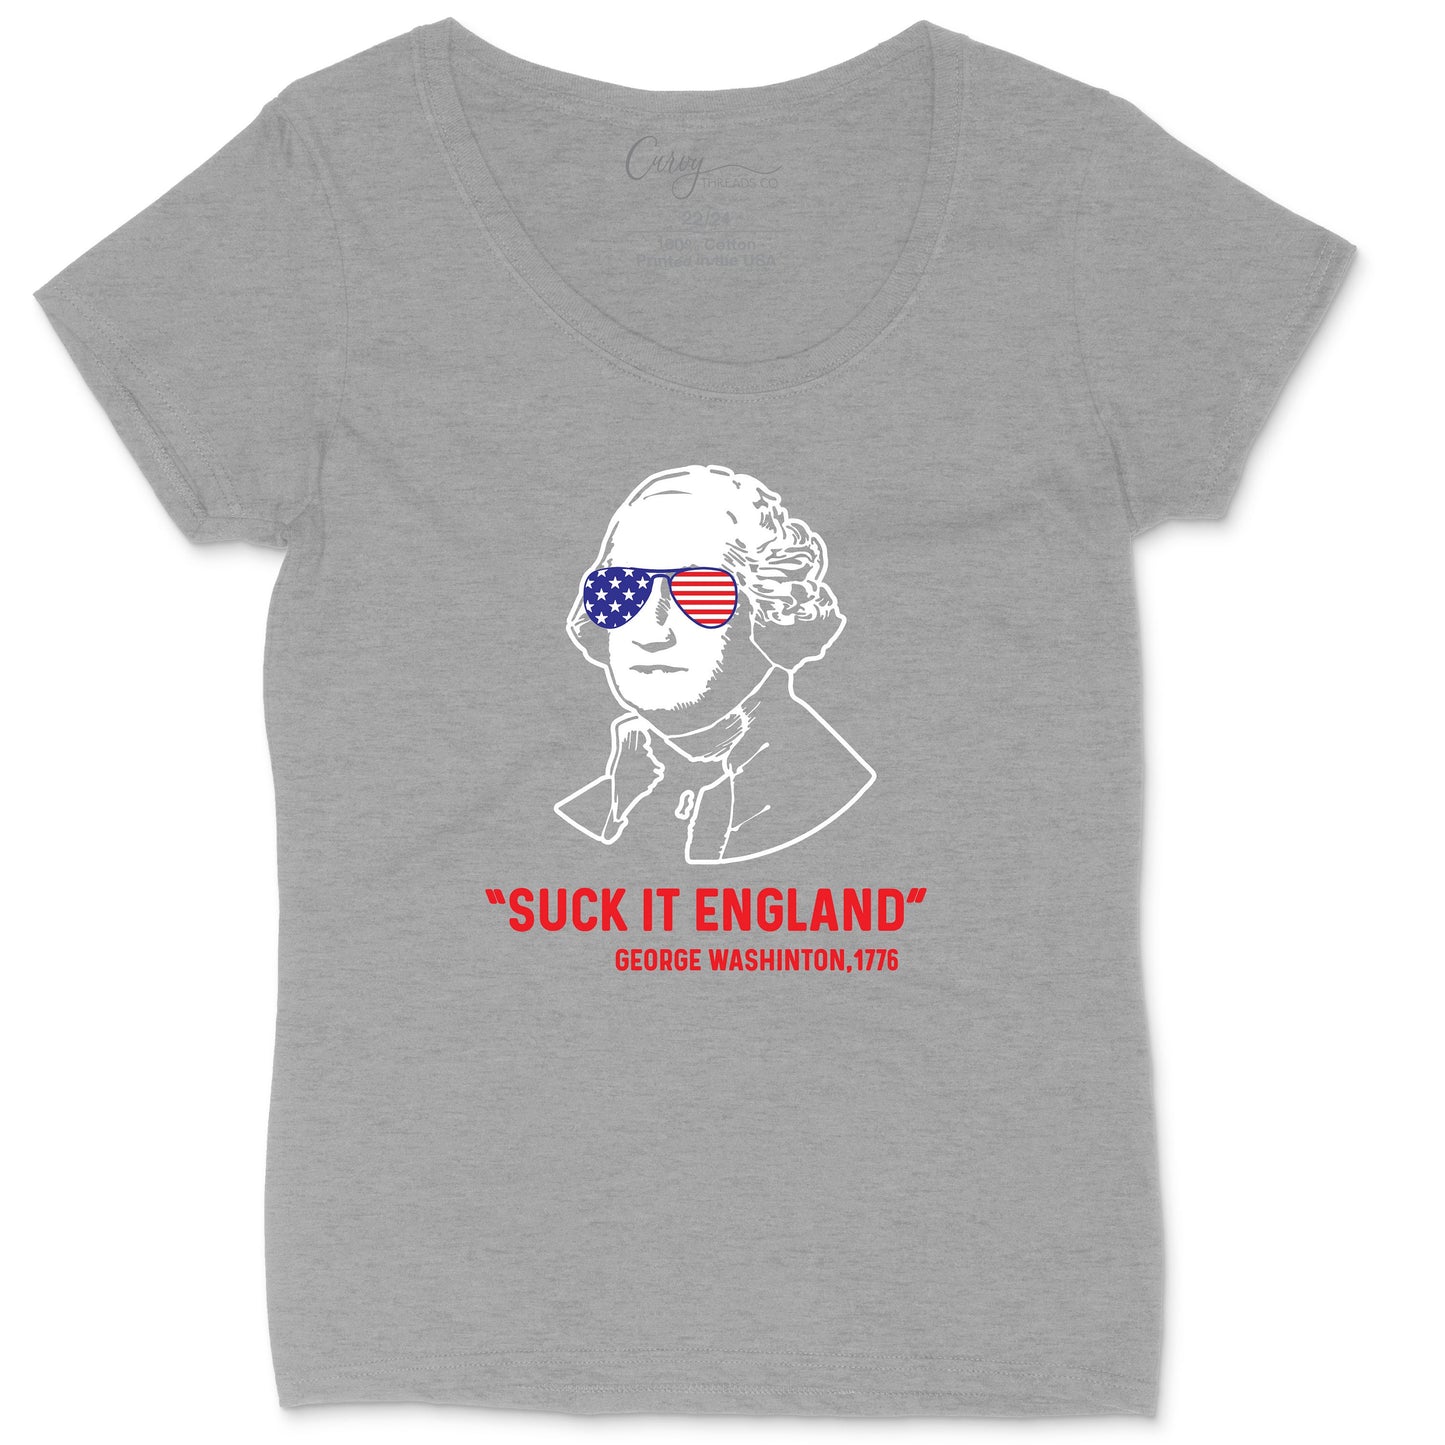 Suck It England | Ladies Plus Size T-Shirt | Fourth of July | Funny Patriotic Shirt | Fireworks Shirt